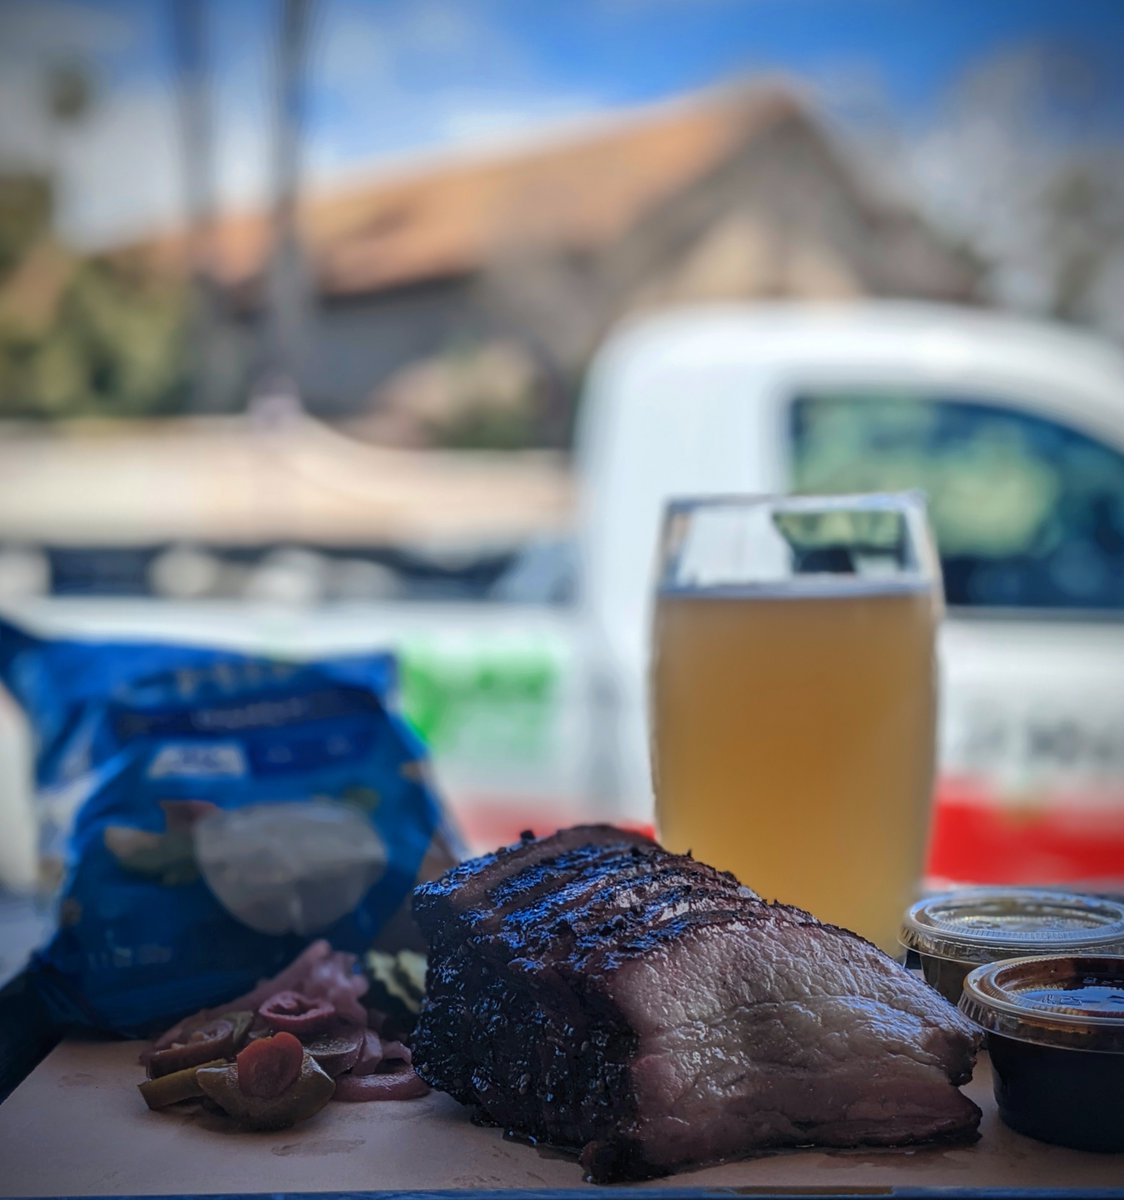 Used the new #teslasupercharger in San Juan Capistrano, and had #porkbelly and a #hefeweizen #beer at Heritage BBQ.